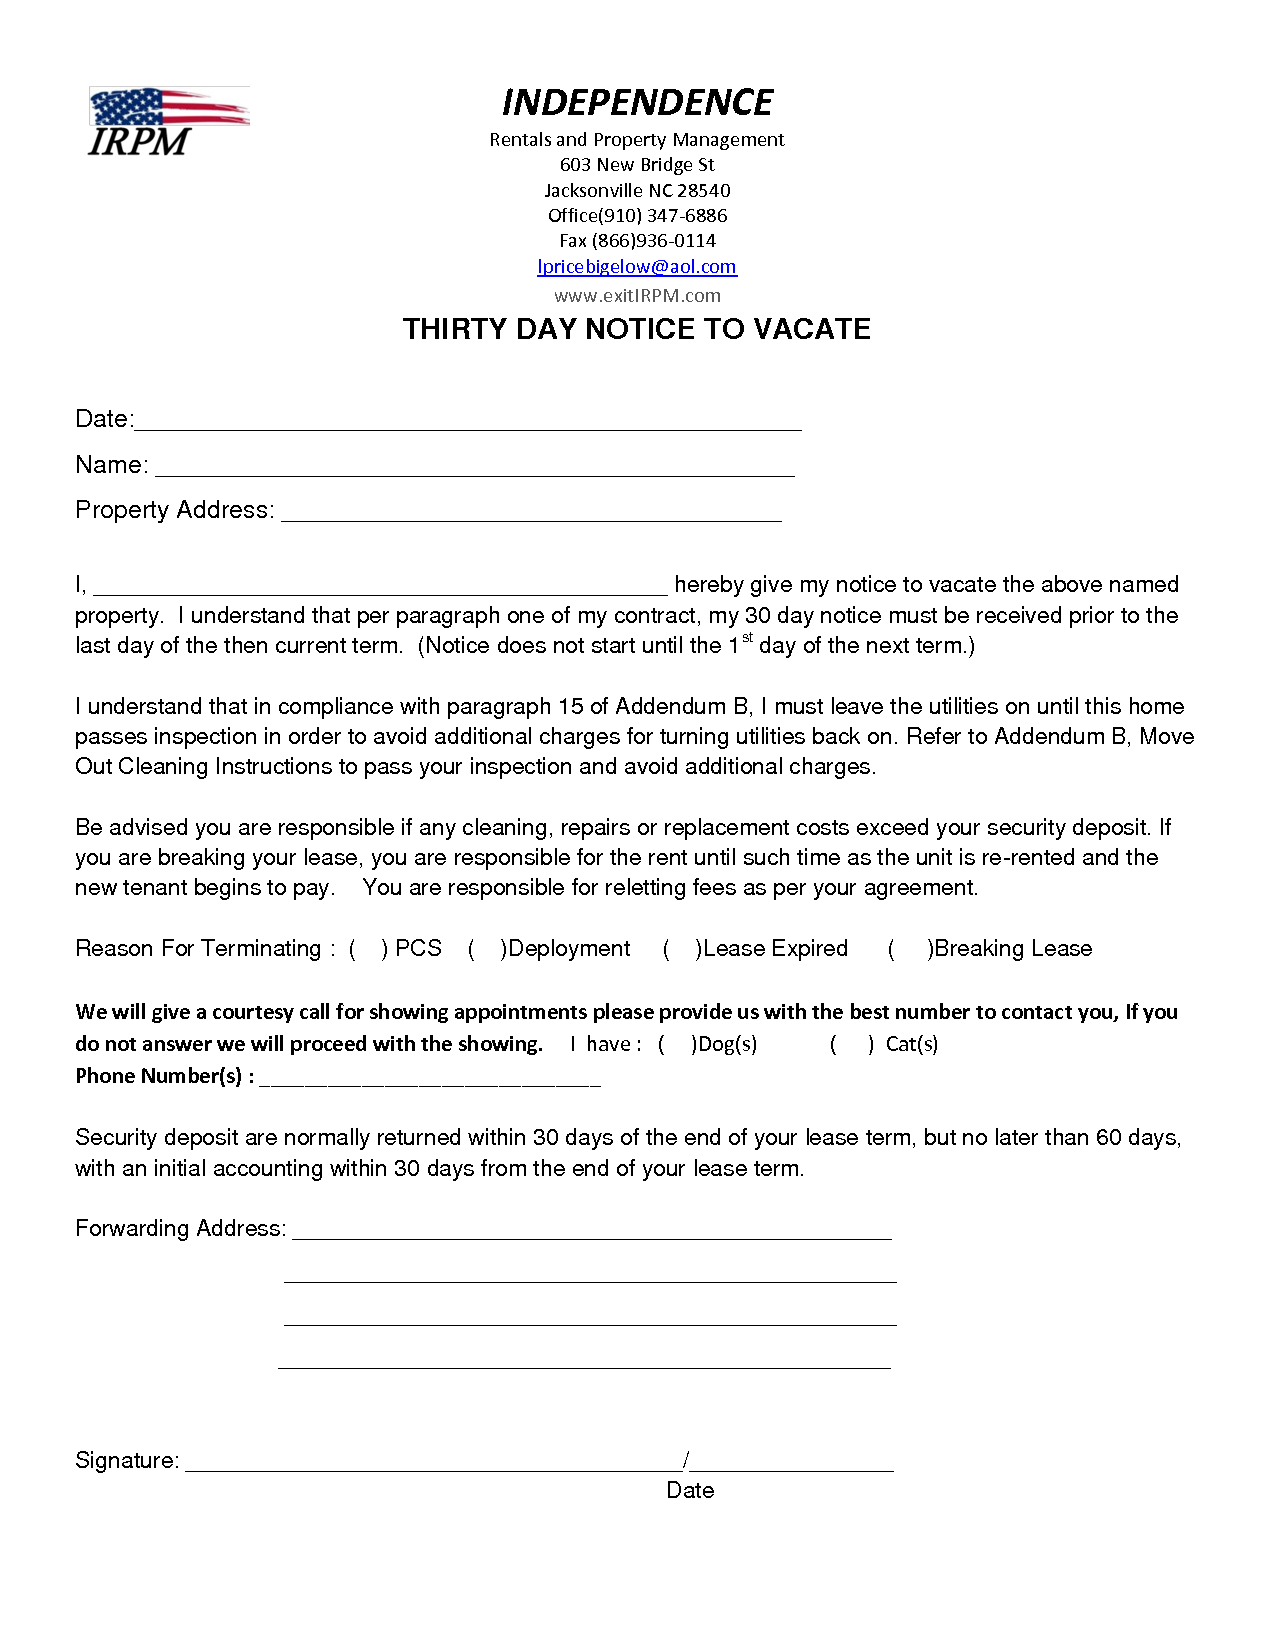 Notice to Vacate Letter Template - Letter Ent to Move From Apartment Out Notice Vacate Example